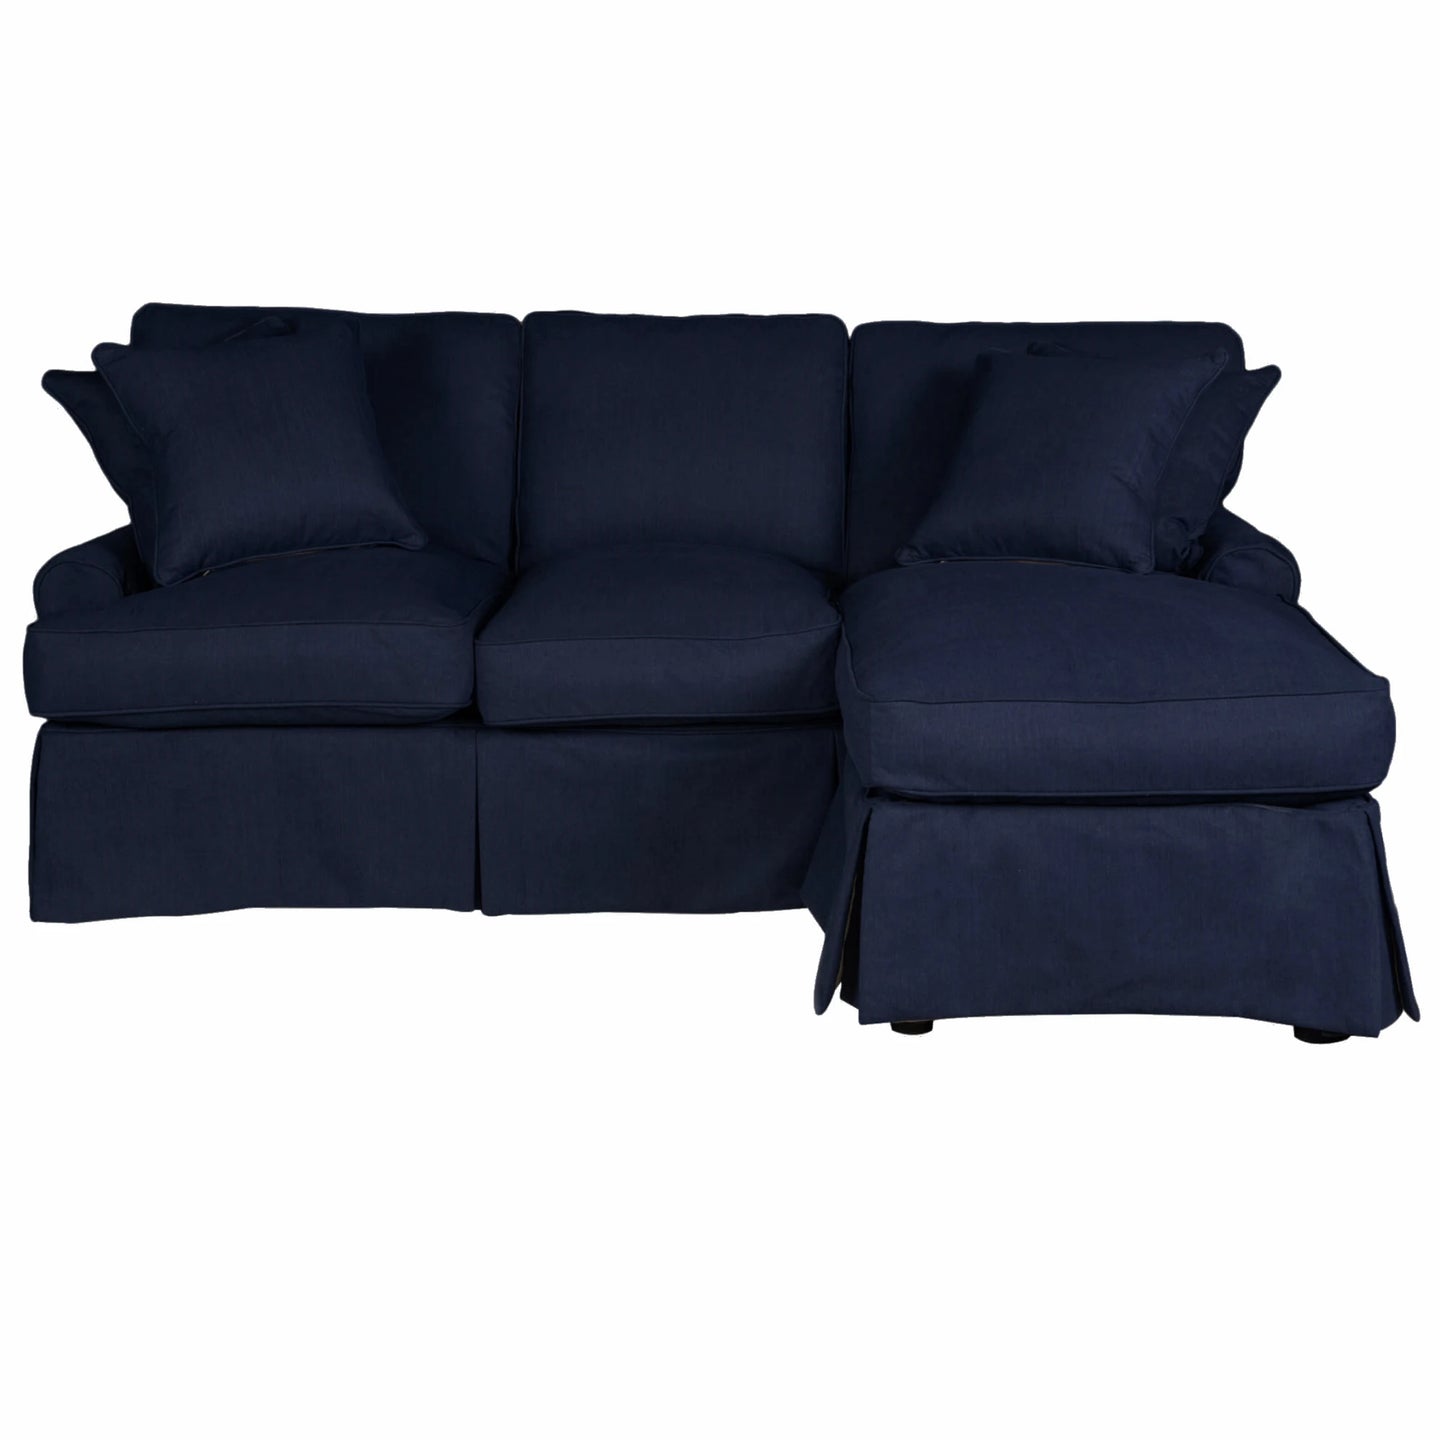 Sunset Trading Horizon Slipcover for T-Cushion Sectional Sofa with Chaise | Stain Resistant Performance Fabric | Navy